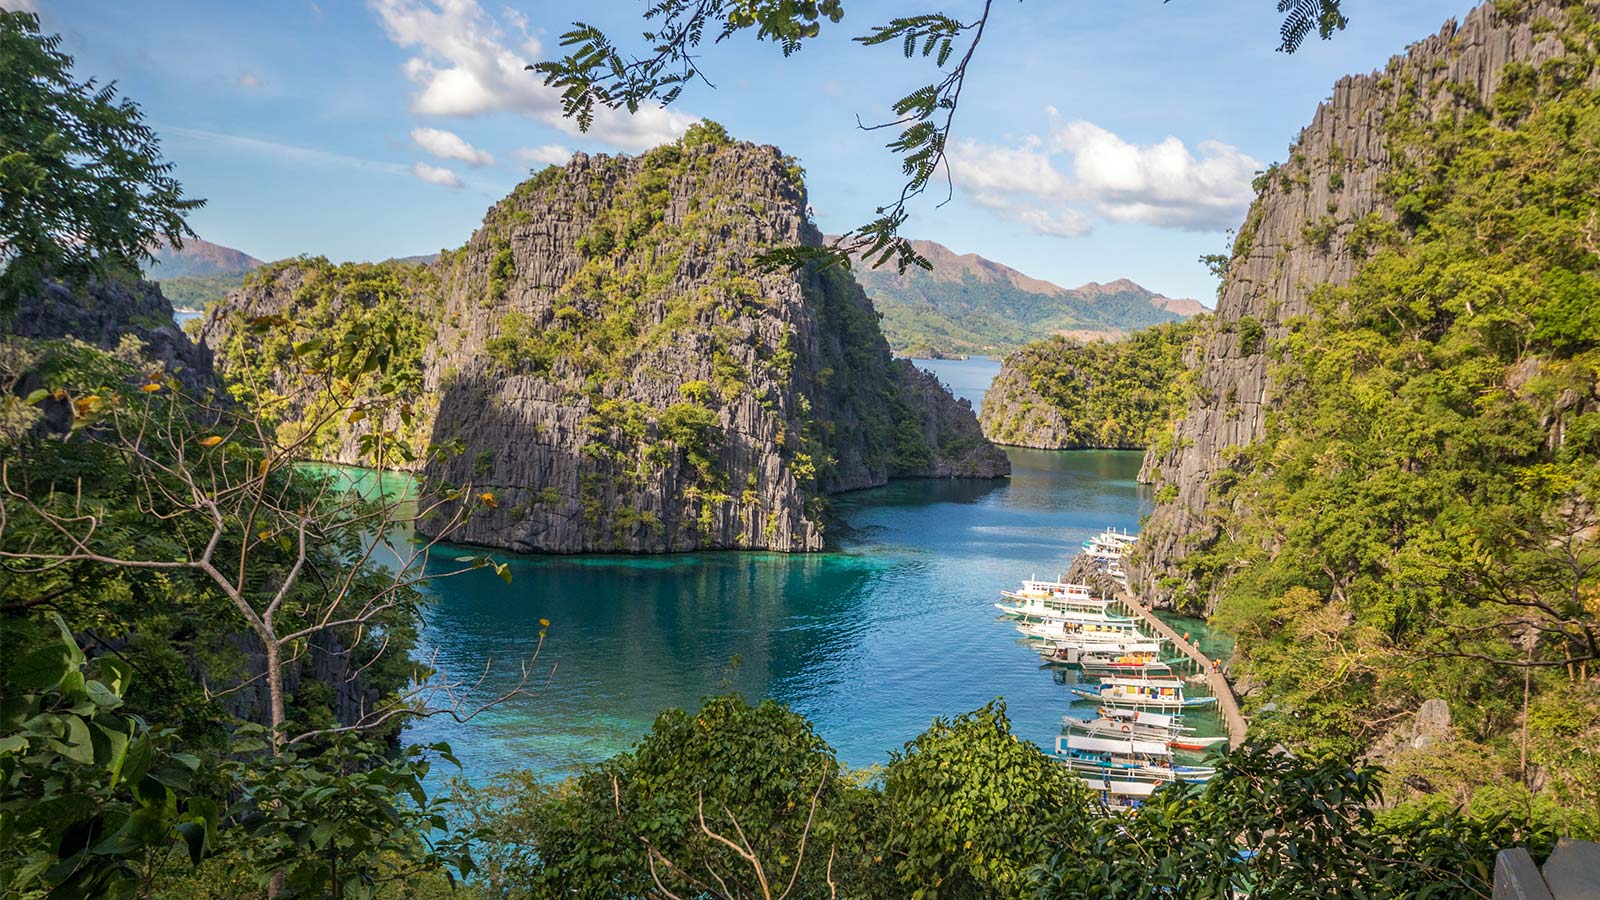 Discover the best tips for visiting Coron Palawan. From understand Coron Island tours to what you haven't heard, check out our tips for Coron Palawan.